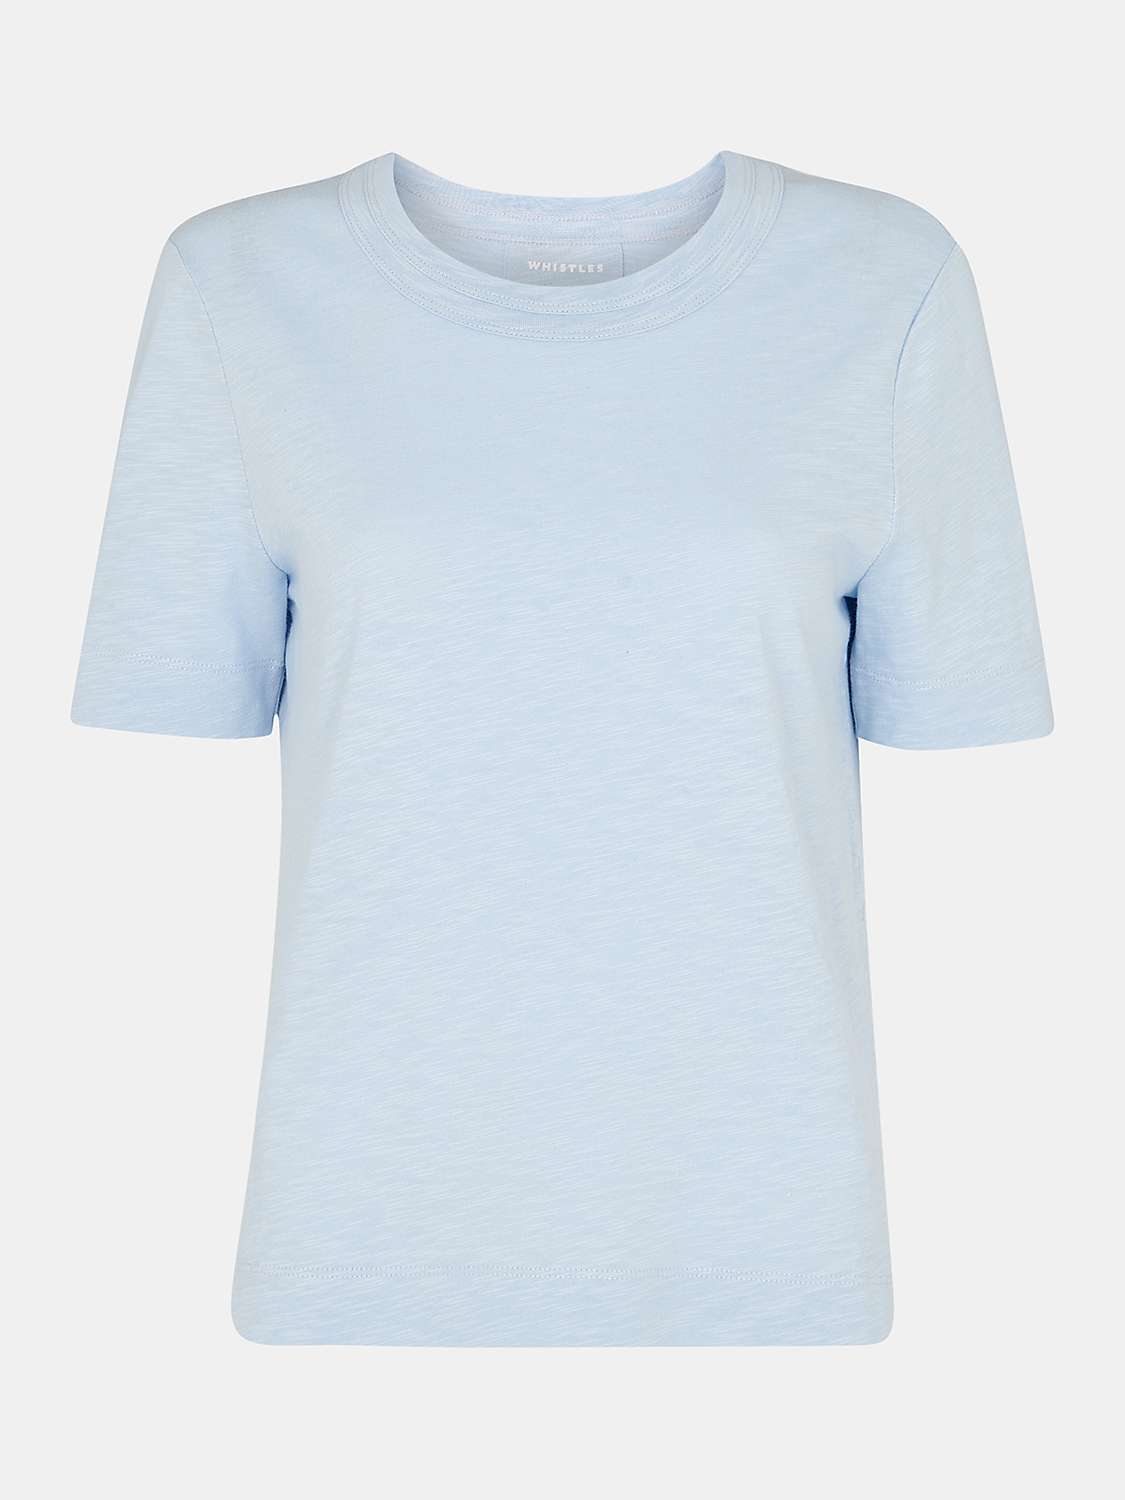 Buy Whistles Rosa Double Trim T-Shirt Online at johnlewis.com